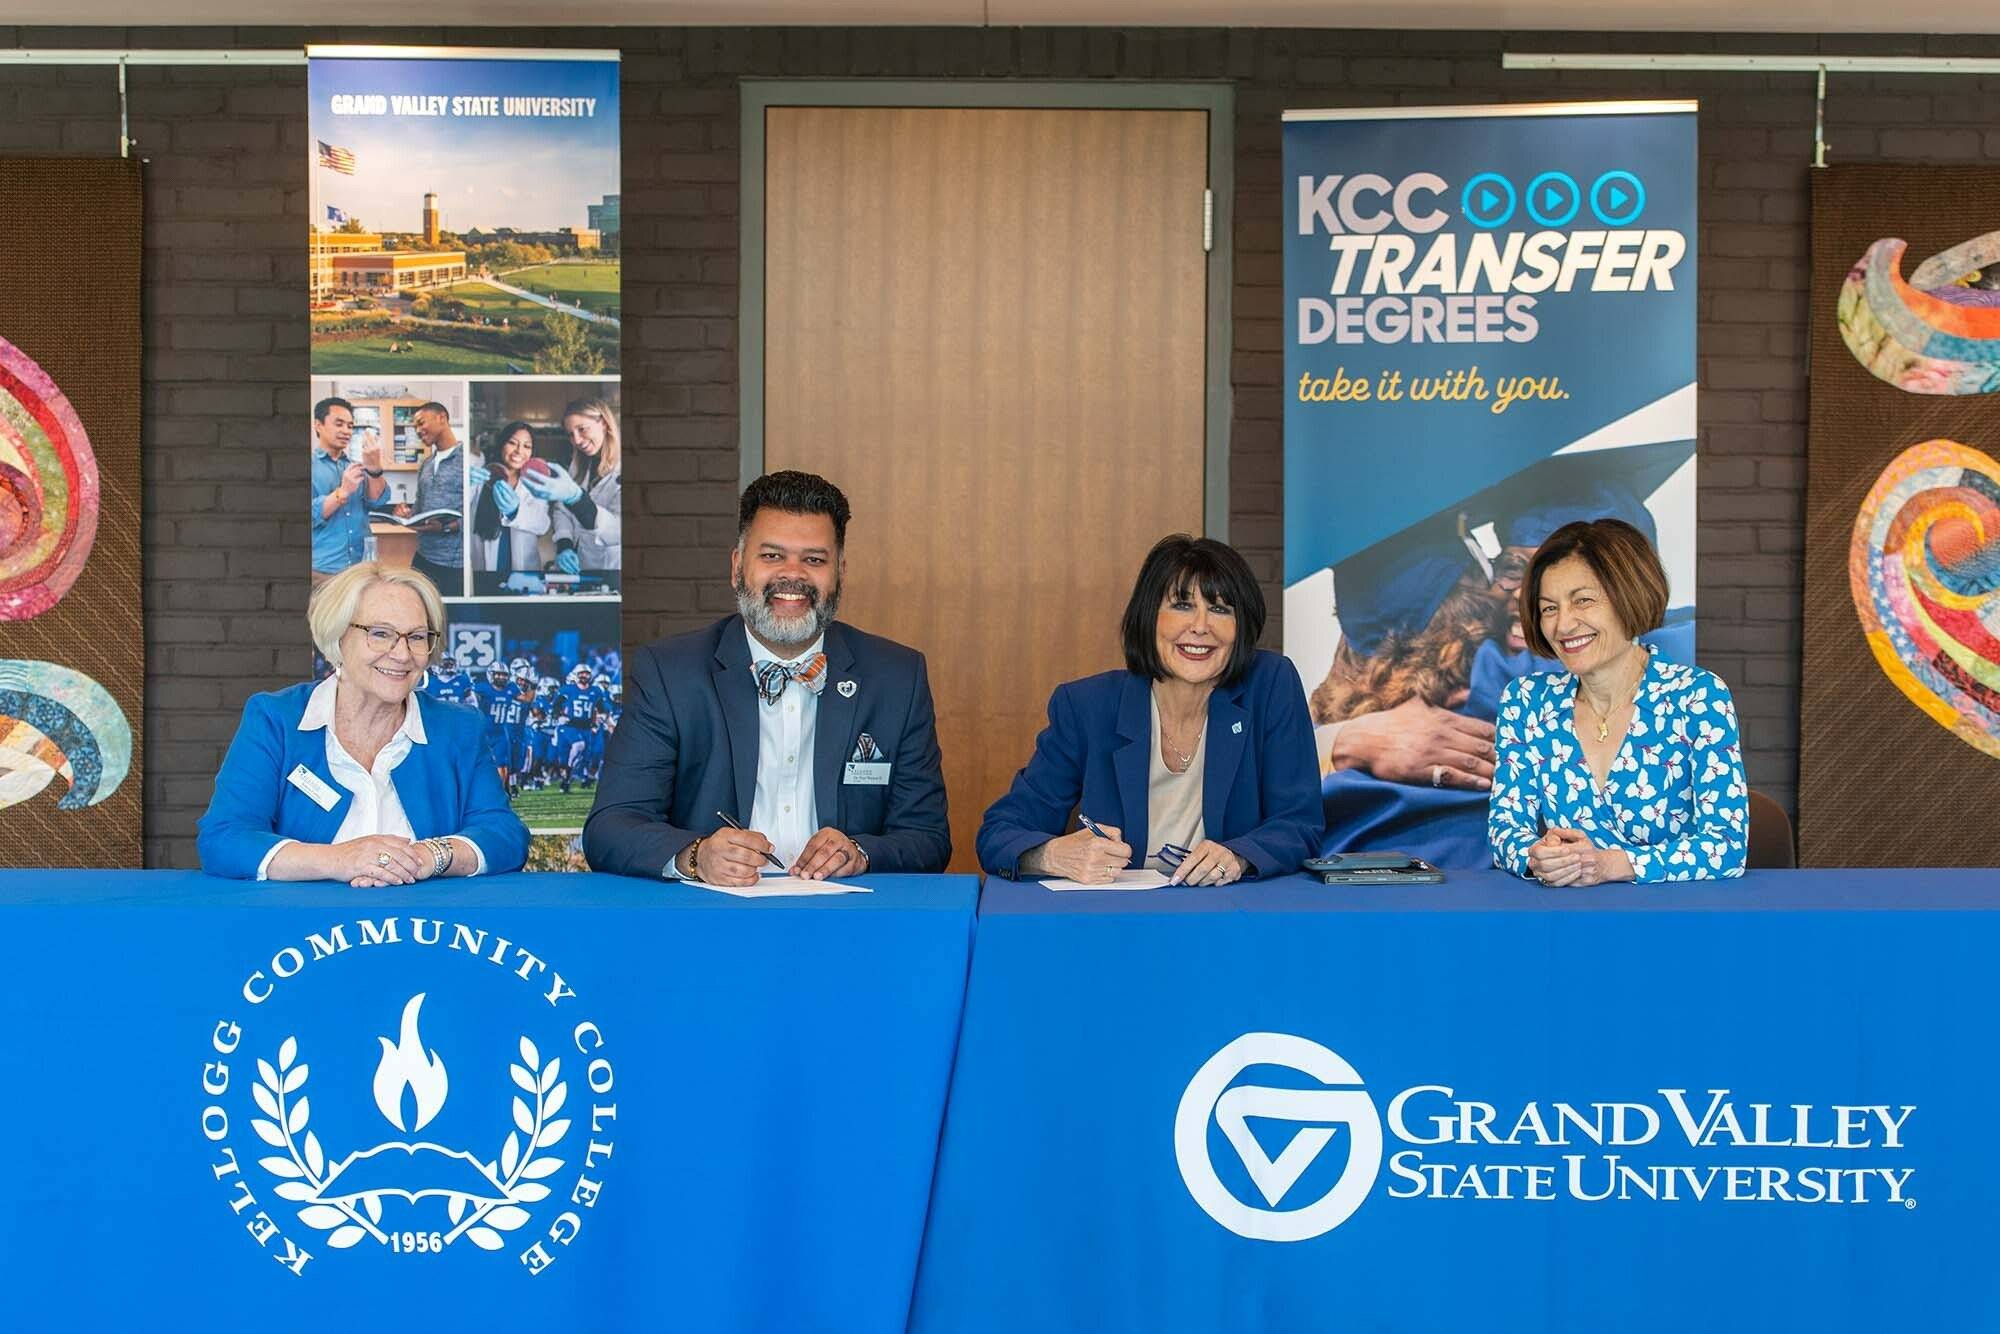 GVSU president and provost with KCC president and vice president signing papers at a table